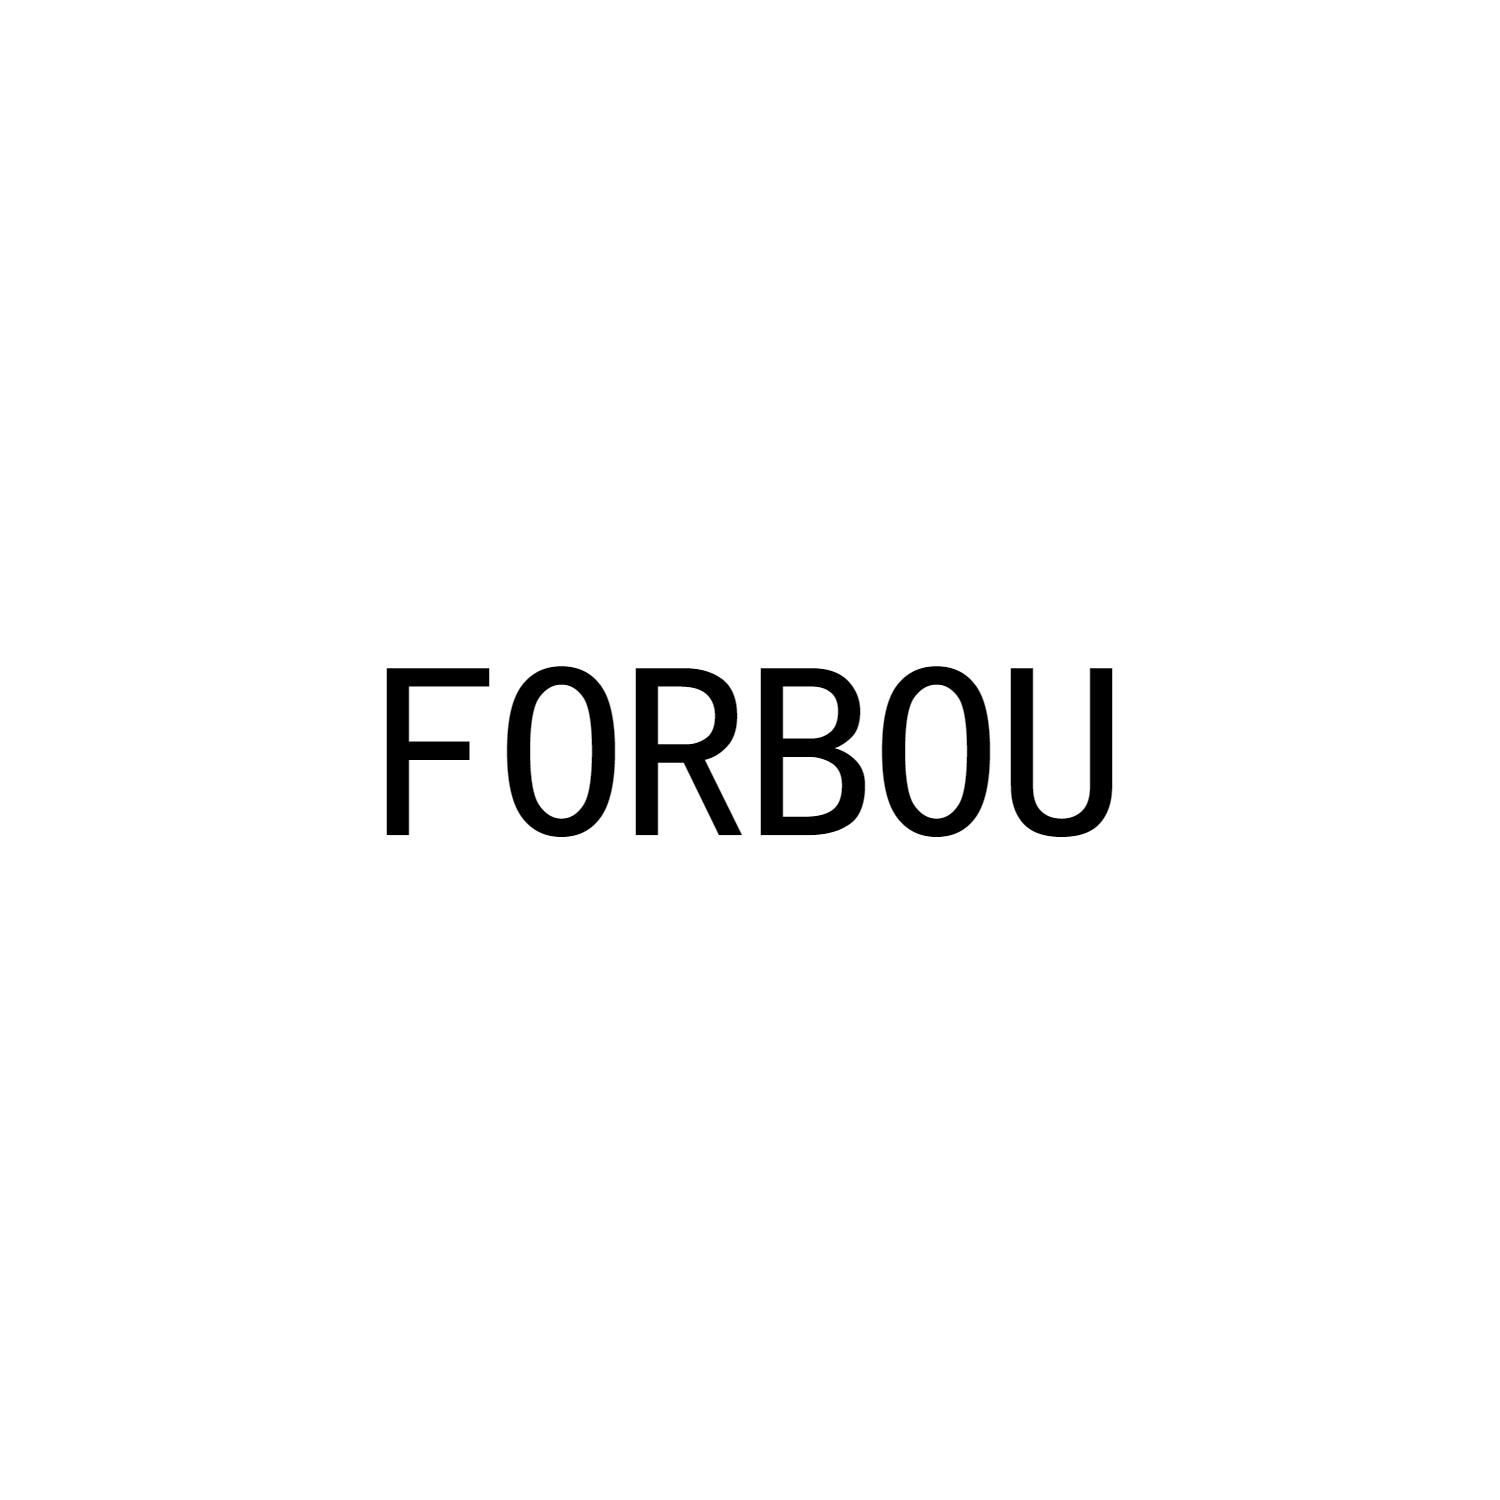 FORBOU